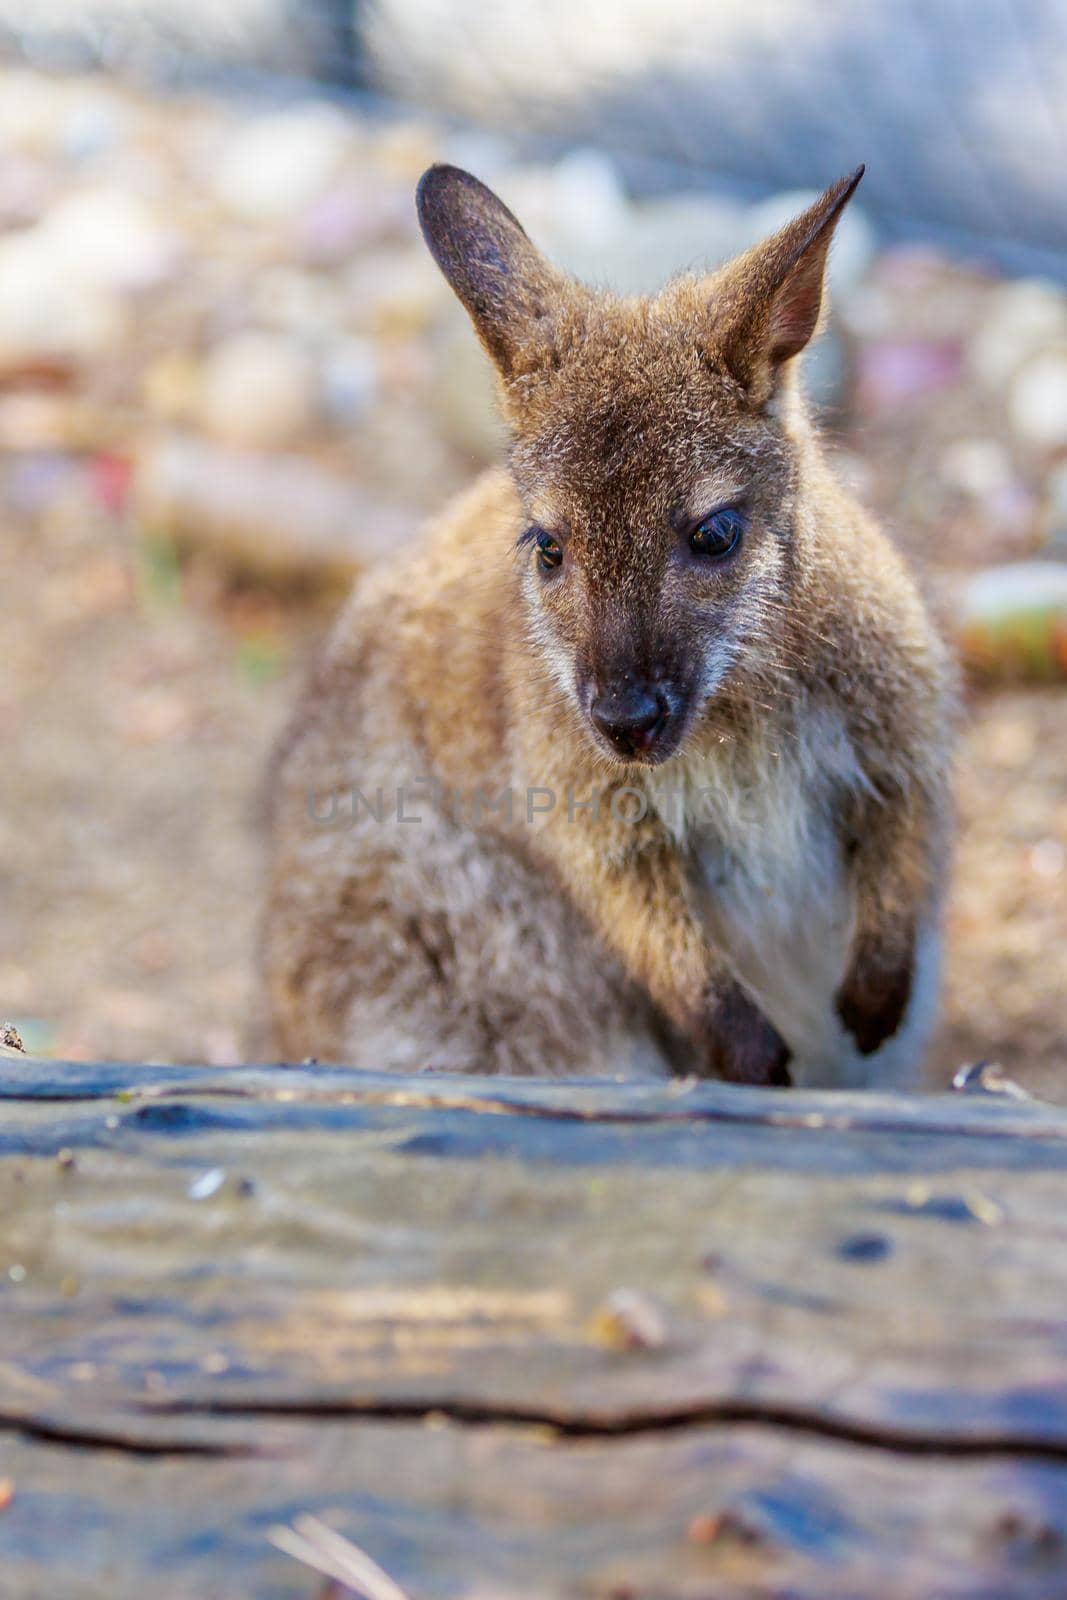 Bennett's Wallaby enjoys leisure time in captivity